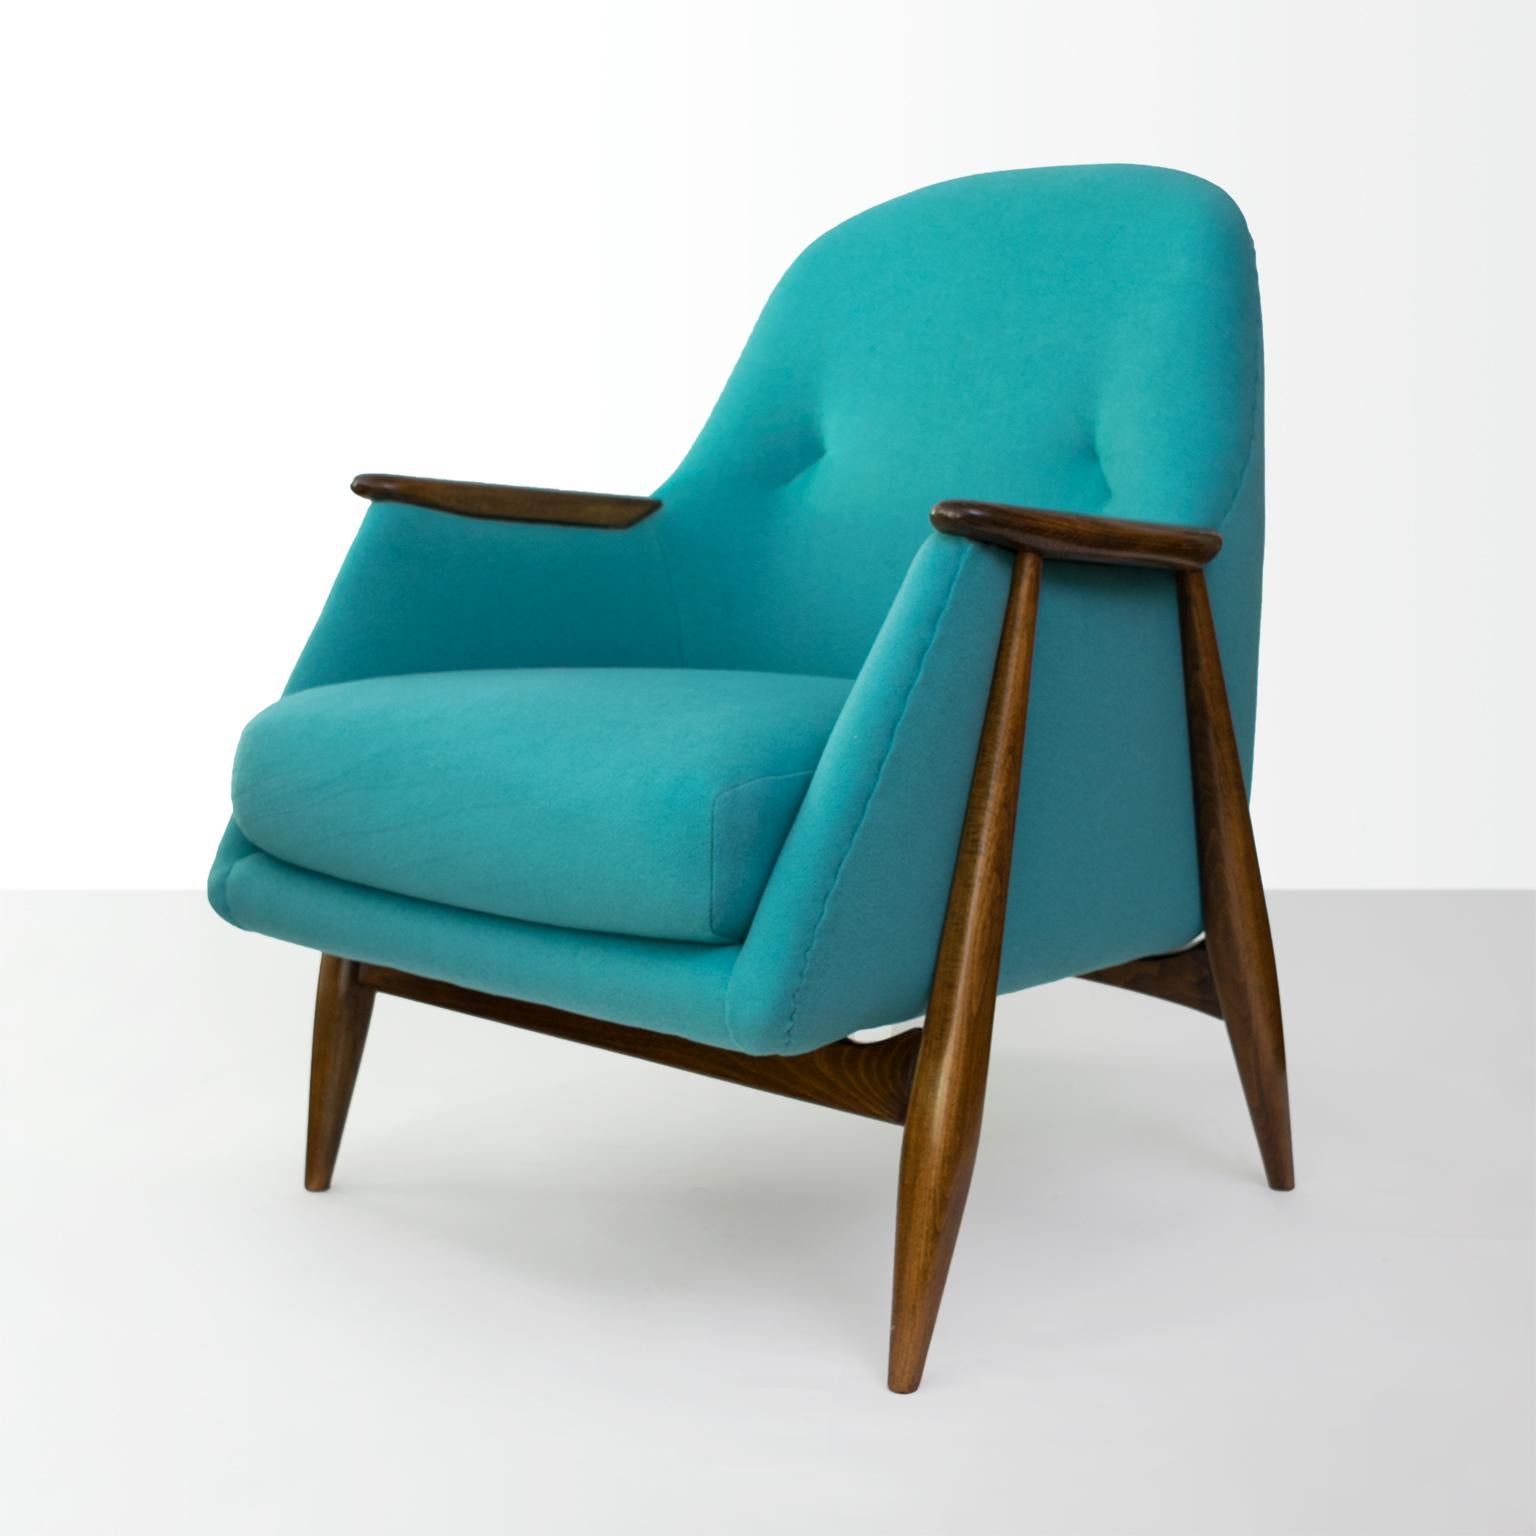 A Scandinavian Modern upholstered armchair with carved stained wood frame designed by Svante Skogh for Asko, Finland, 1954. Newly refinished and upholstered in soft 100% wool fabric.

Measures: Height 32.5